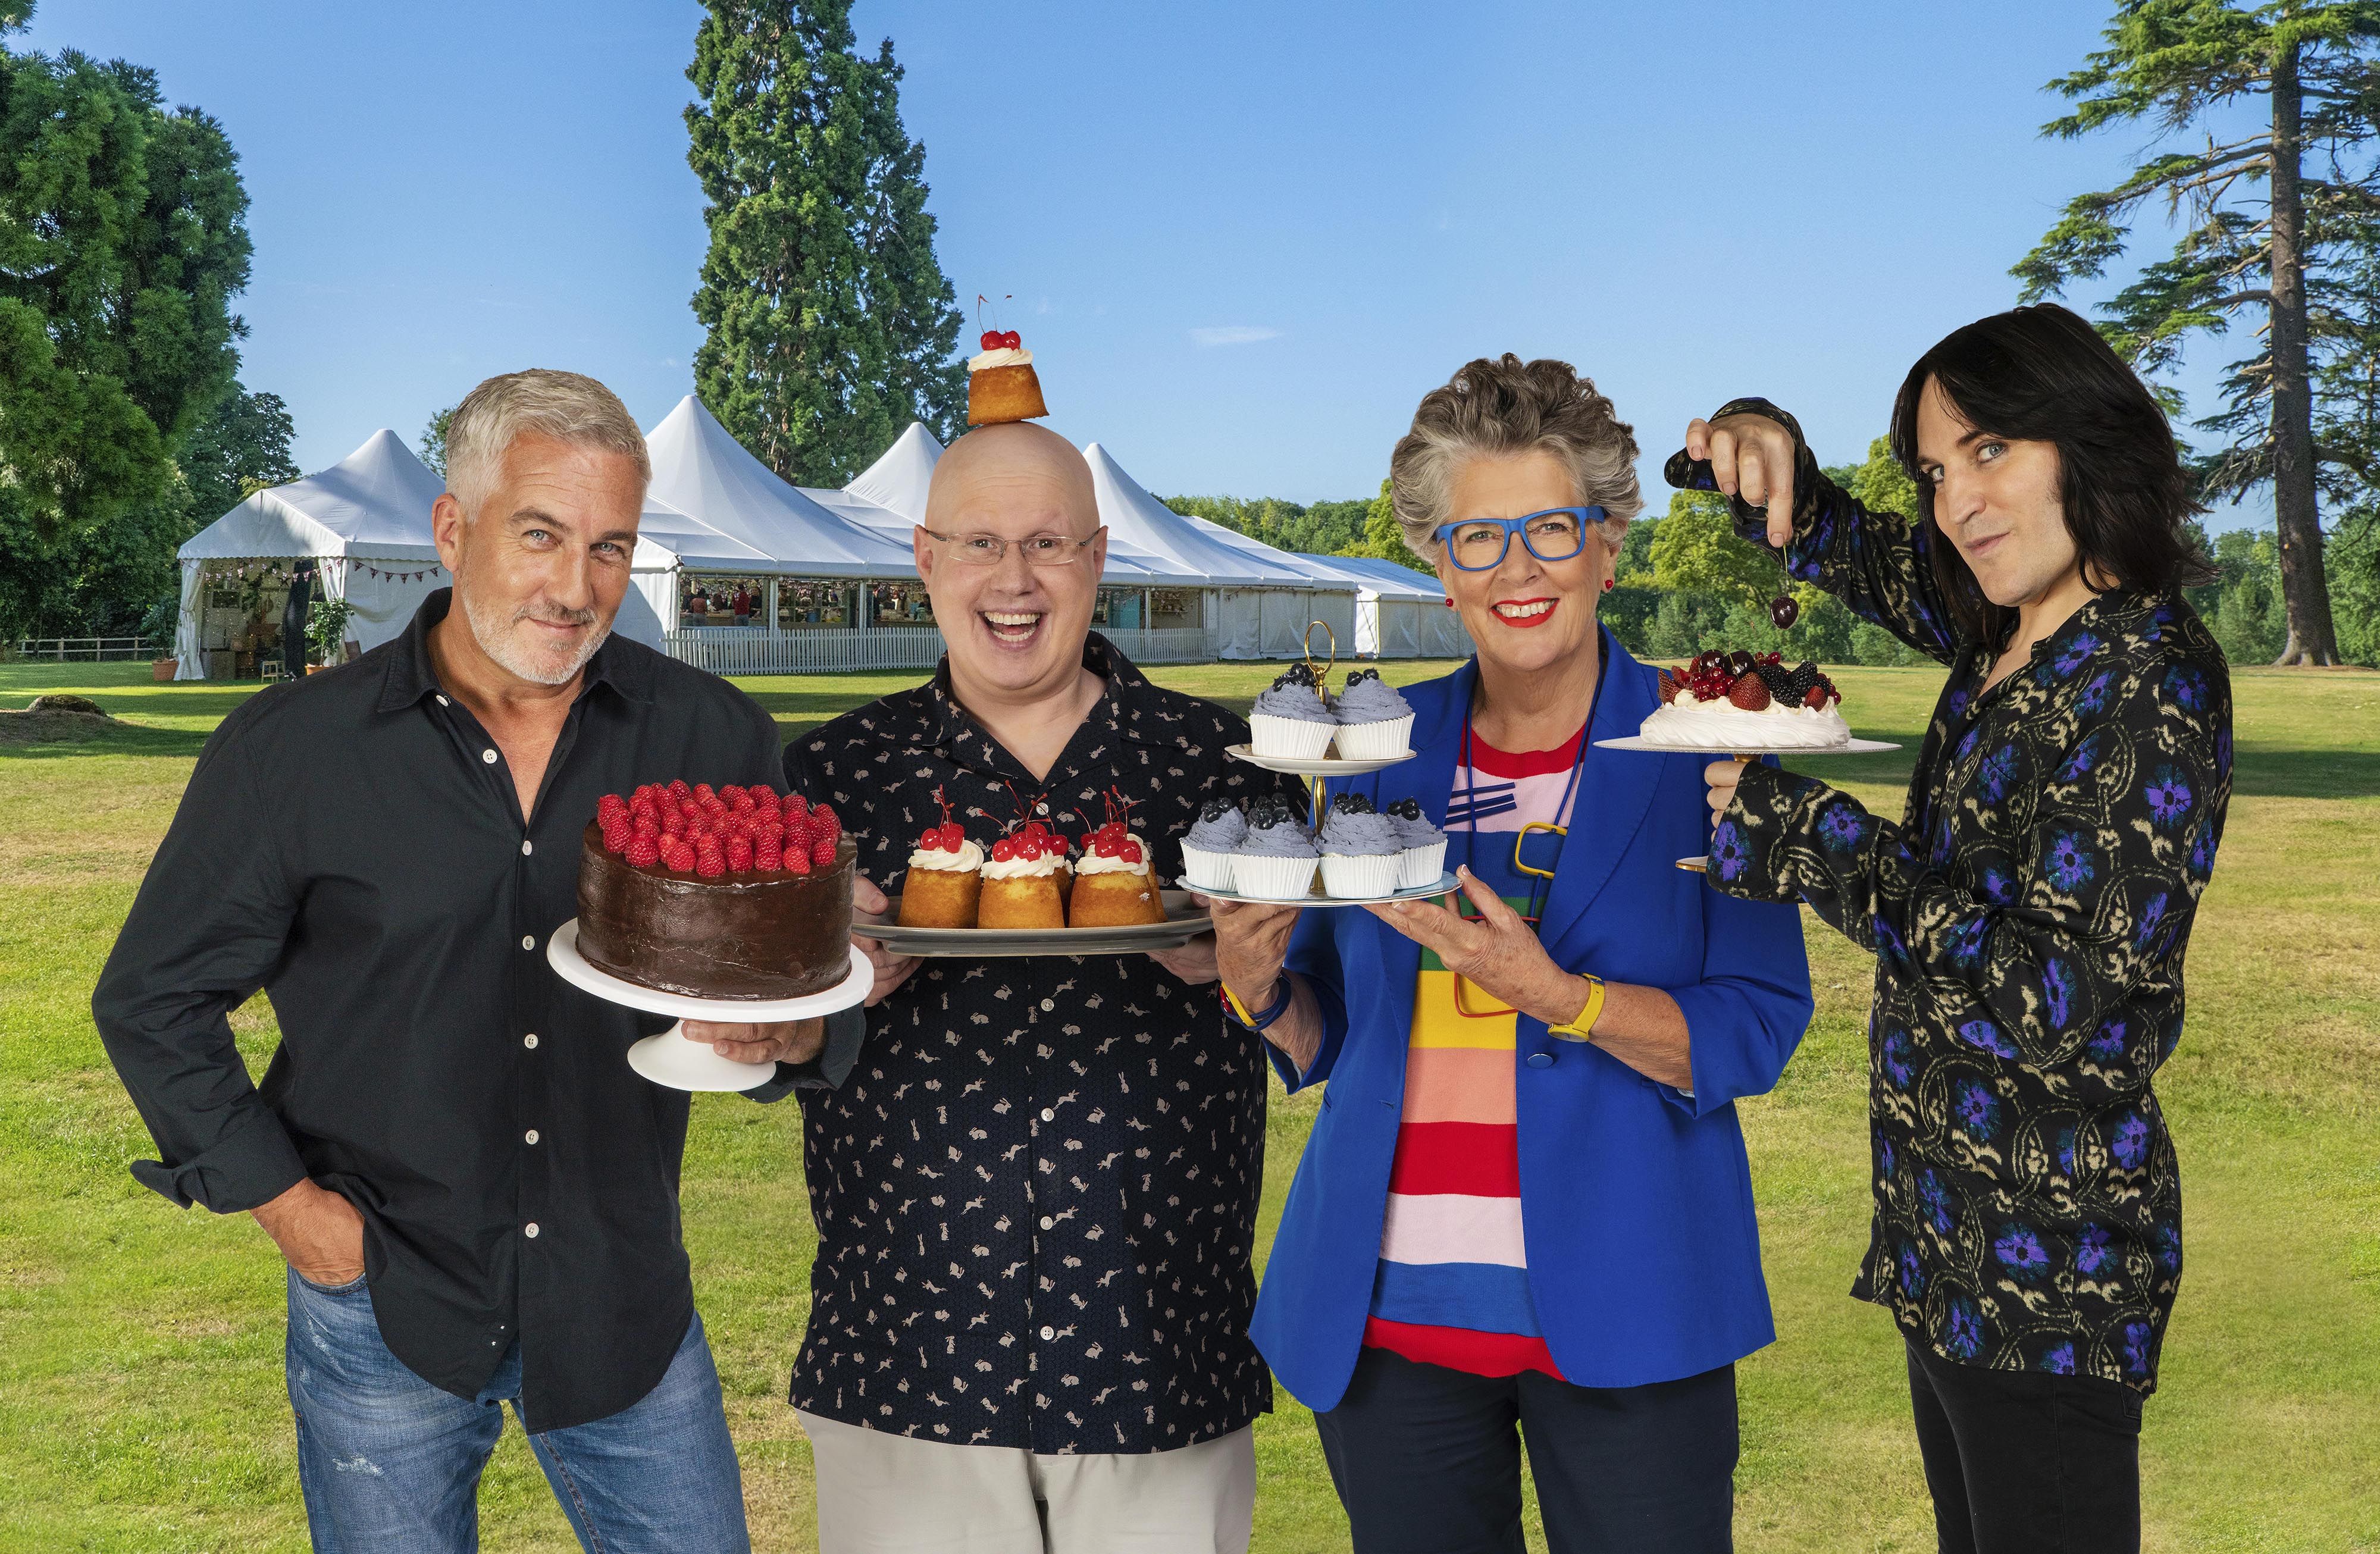 the great british bake off christmas special 2020 Pagdfj844 Rfem the great british bake off christmas special 2020